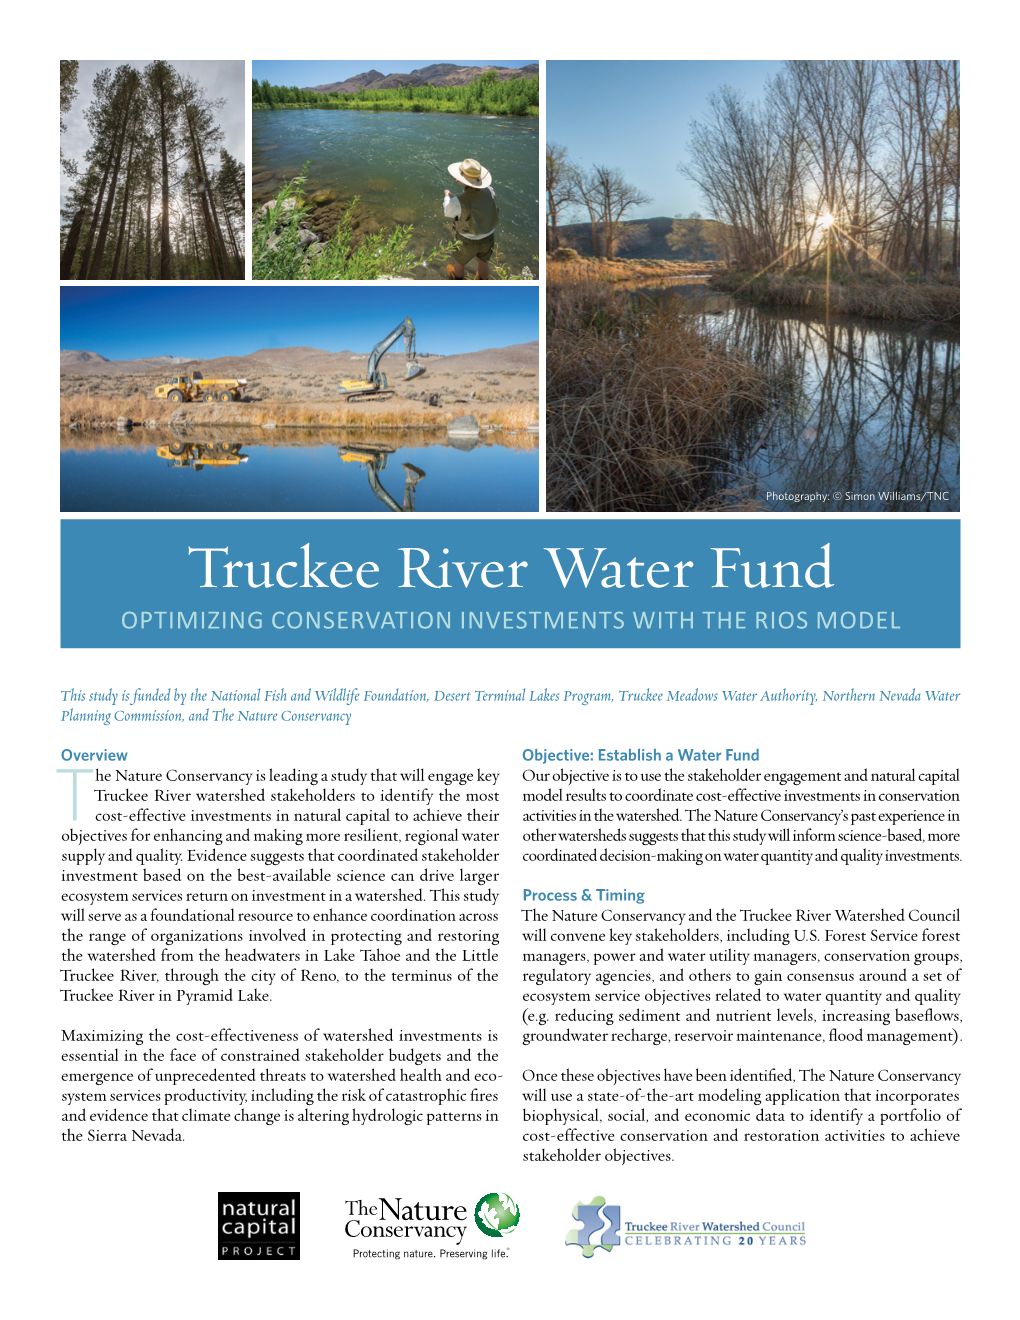 Truckee River Water Fund OPTIMIZING CONSERVATION INVESTMENTS with the RIOS MODEL